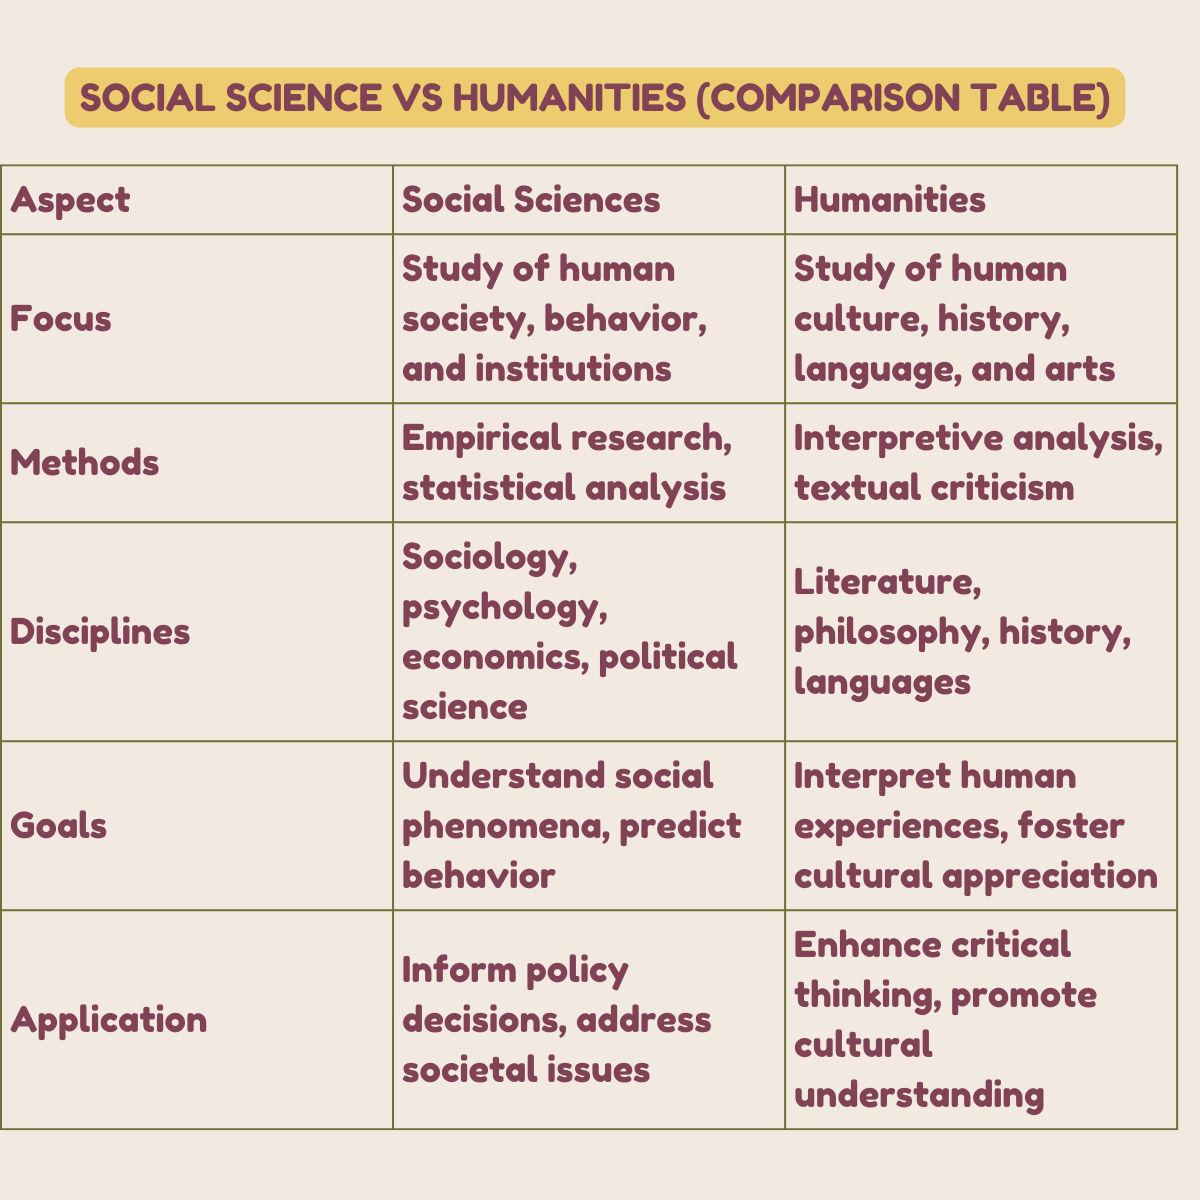 Social Science vs Humanities (Comparison Table)